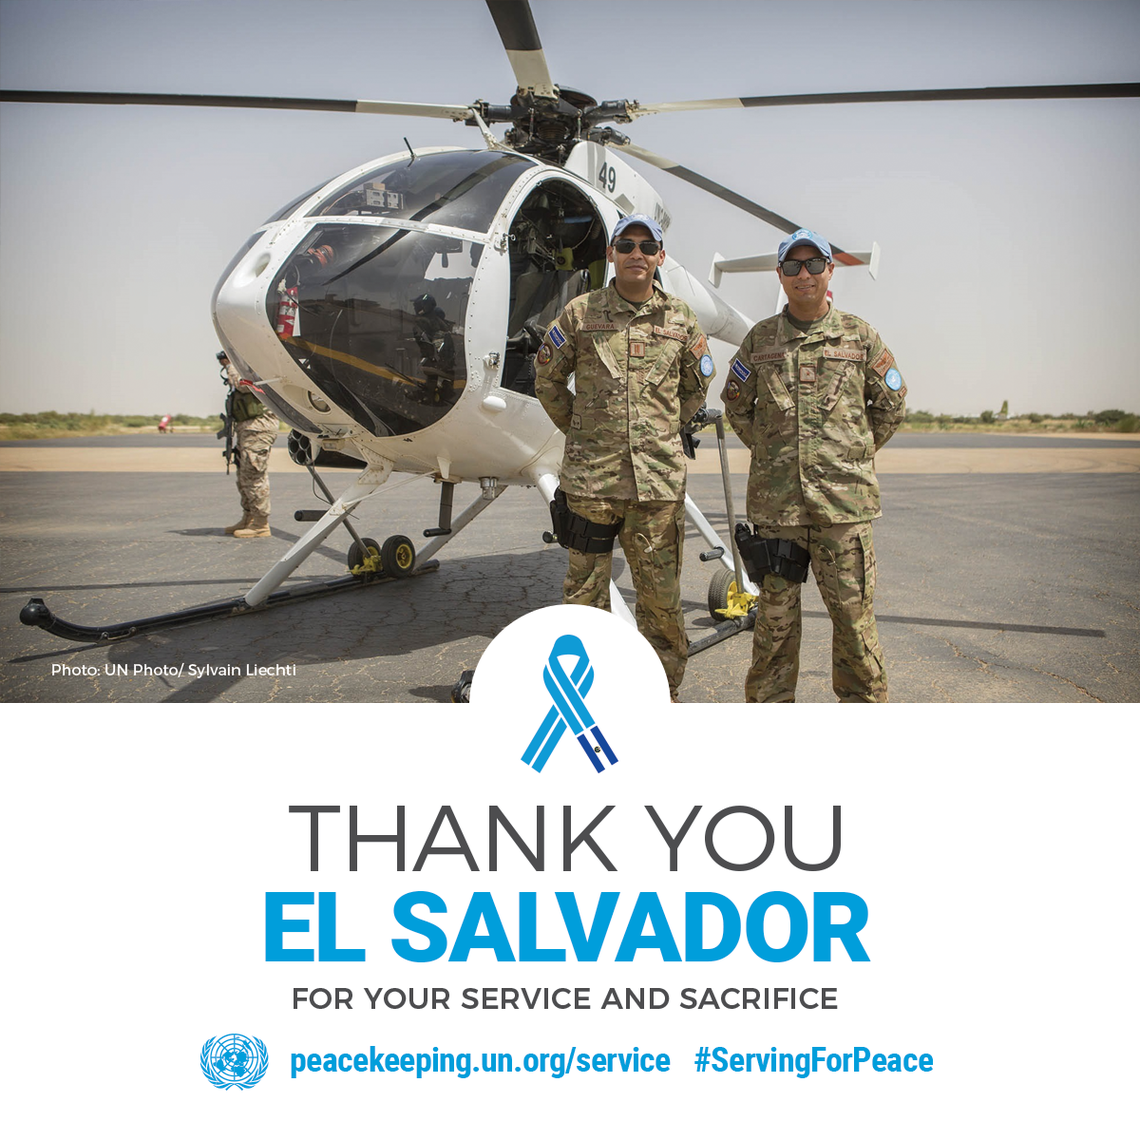 Helicopter pilots from El Salvador serving in Mali